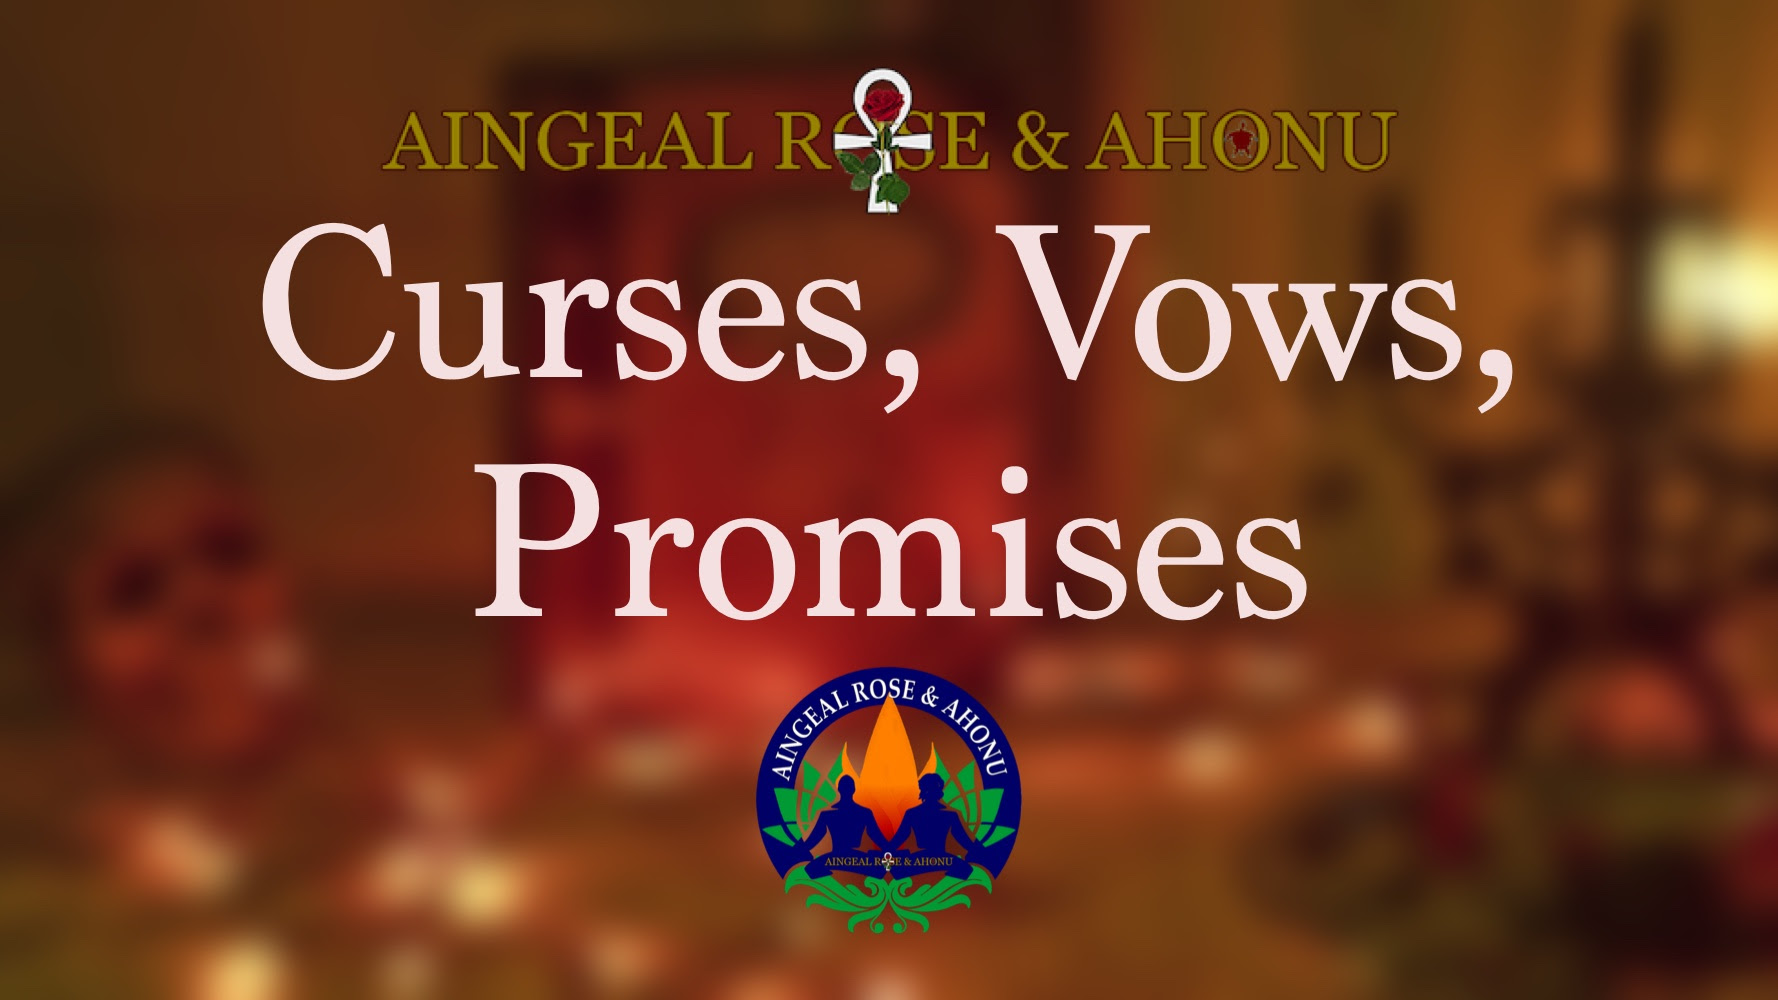 Curses, Spells, Vows, Promises & Entity Attachments and how to remove them, is a dialog between Aingeal Rose & Ahonu, recorded in Sedona, AZ.